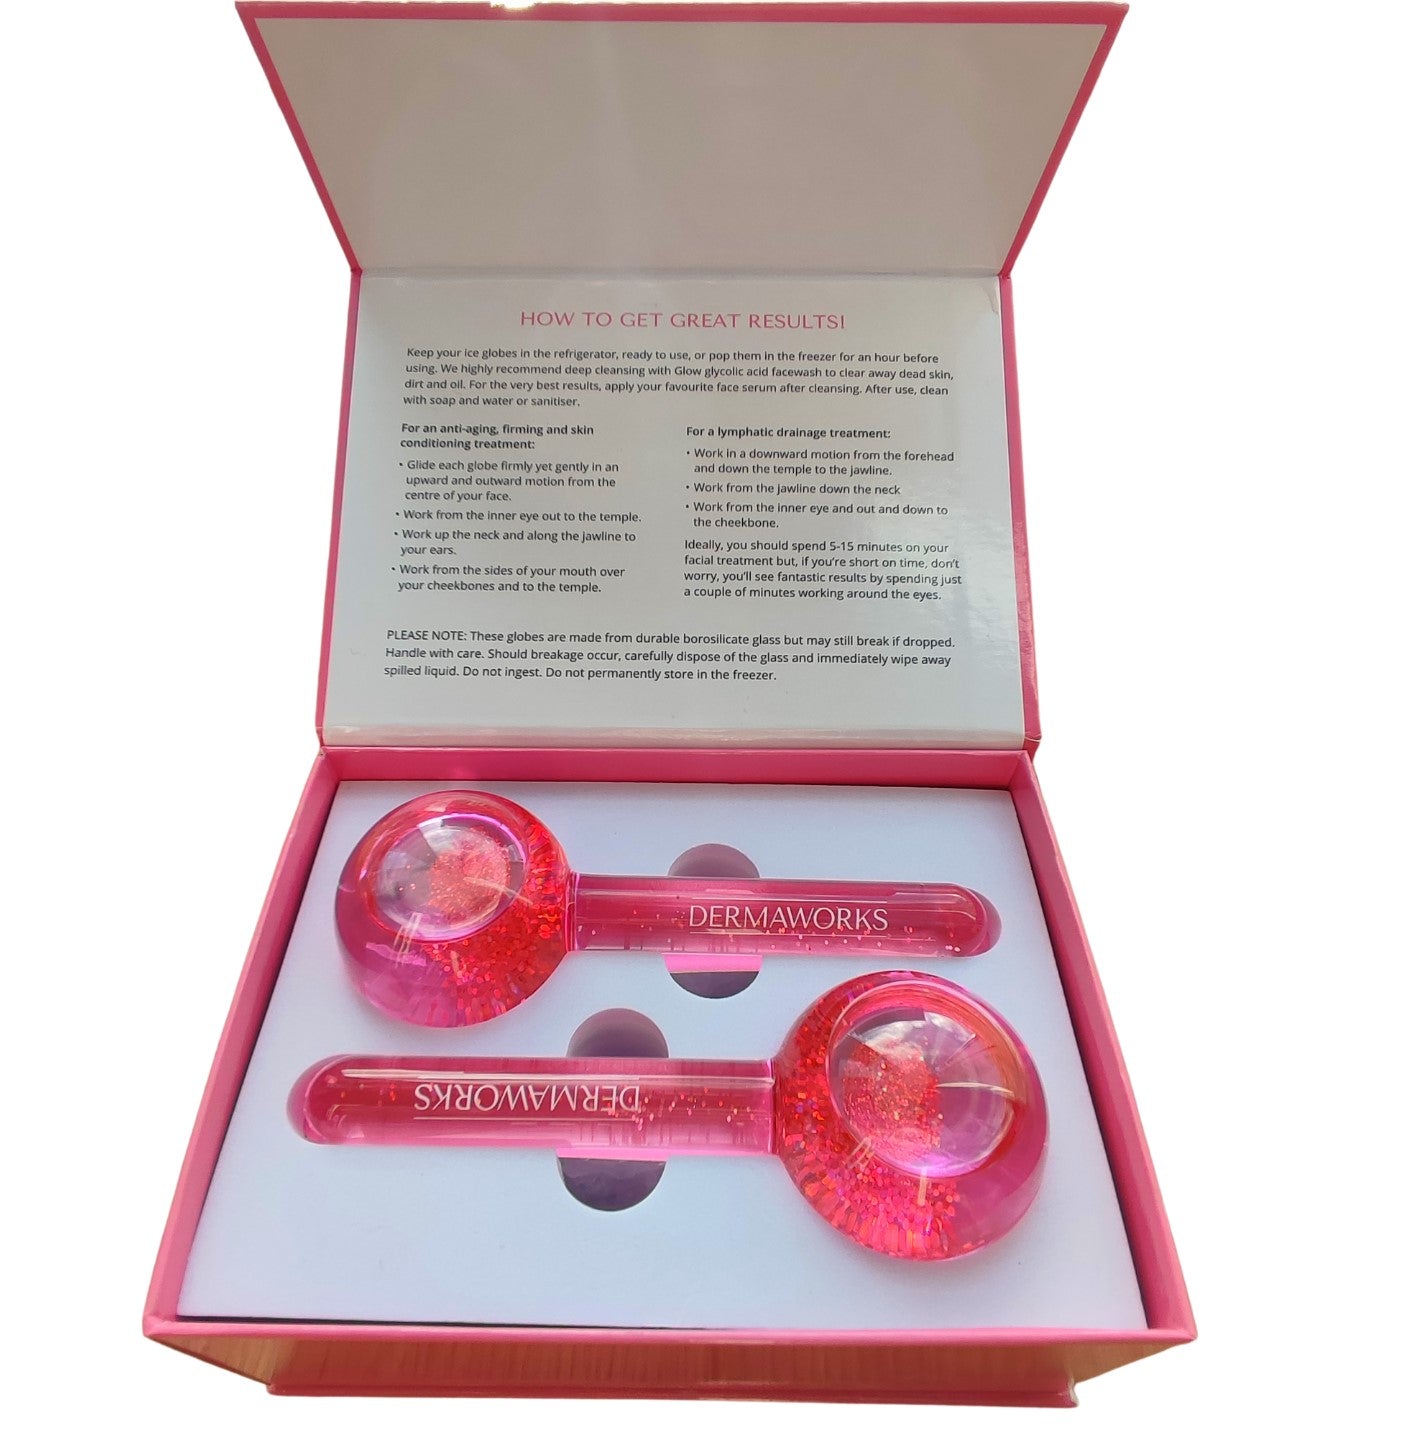 Dermaworks ice globes for face and eyes in presentation box. Ideal skincare beauty gift for women.